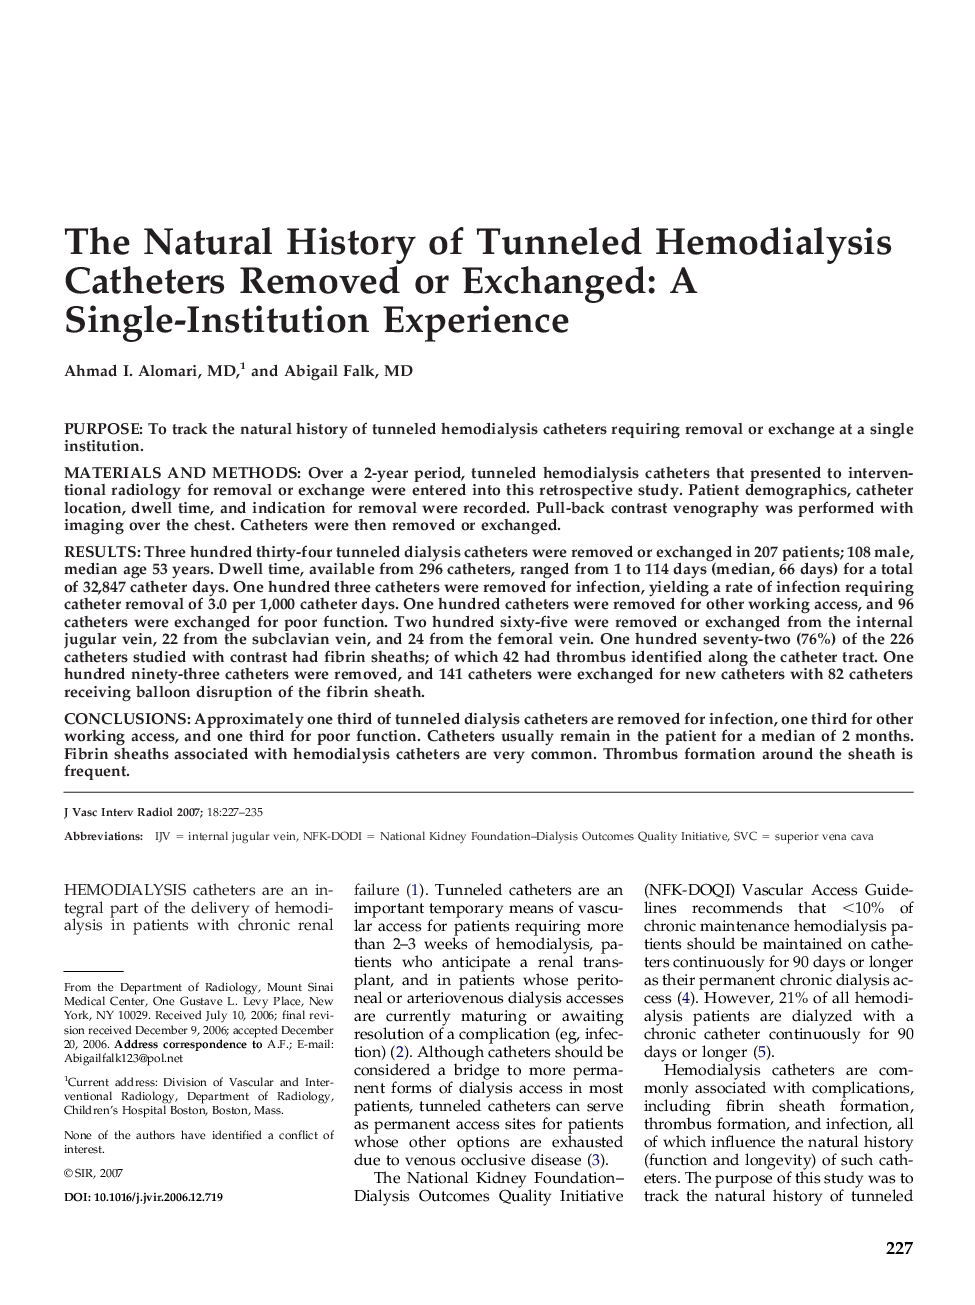 The Natural History of Tunneled Hemodialysis Catheters Removed or Exchanged: A Single-Institution Experience